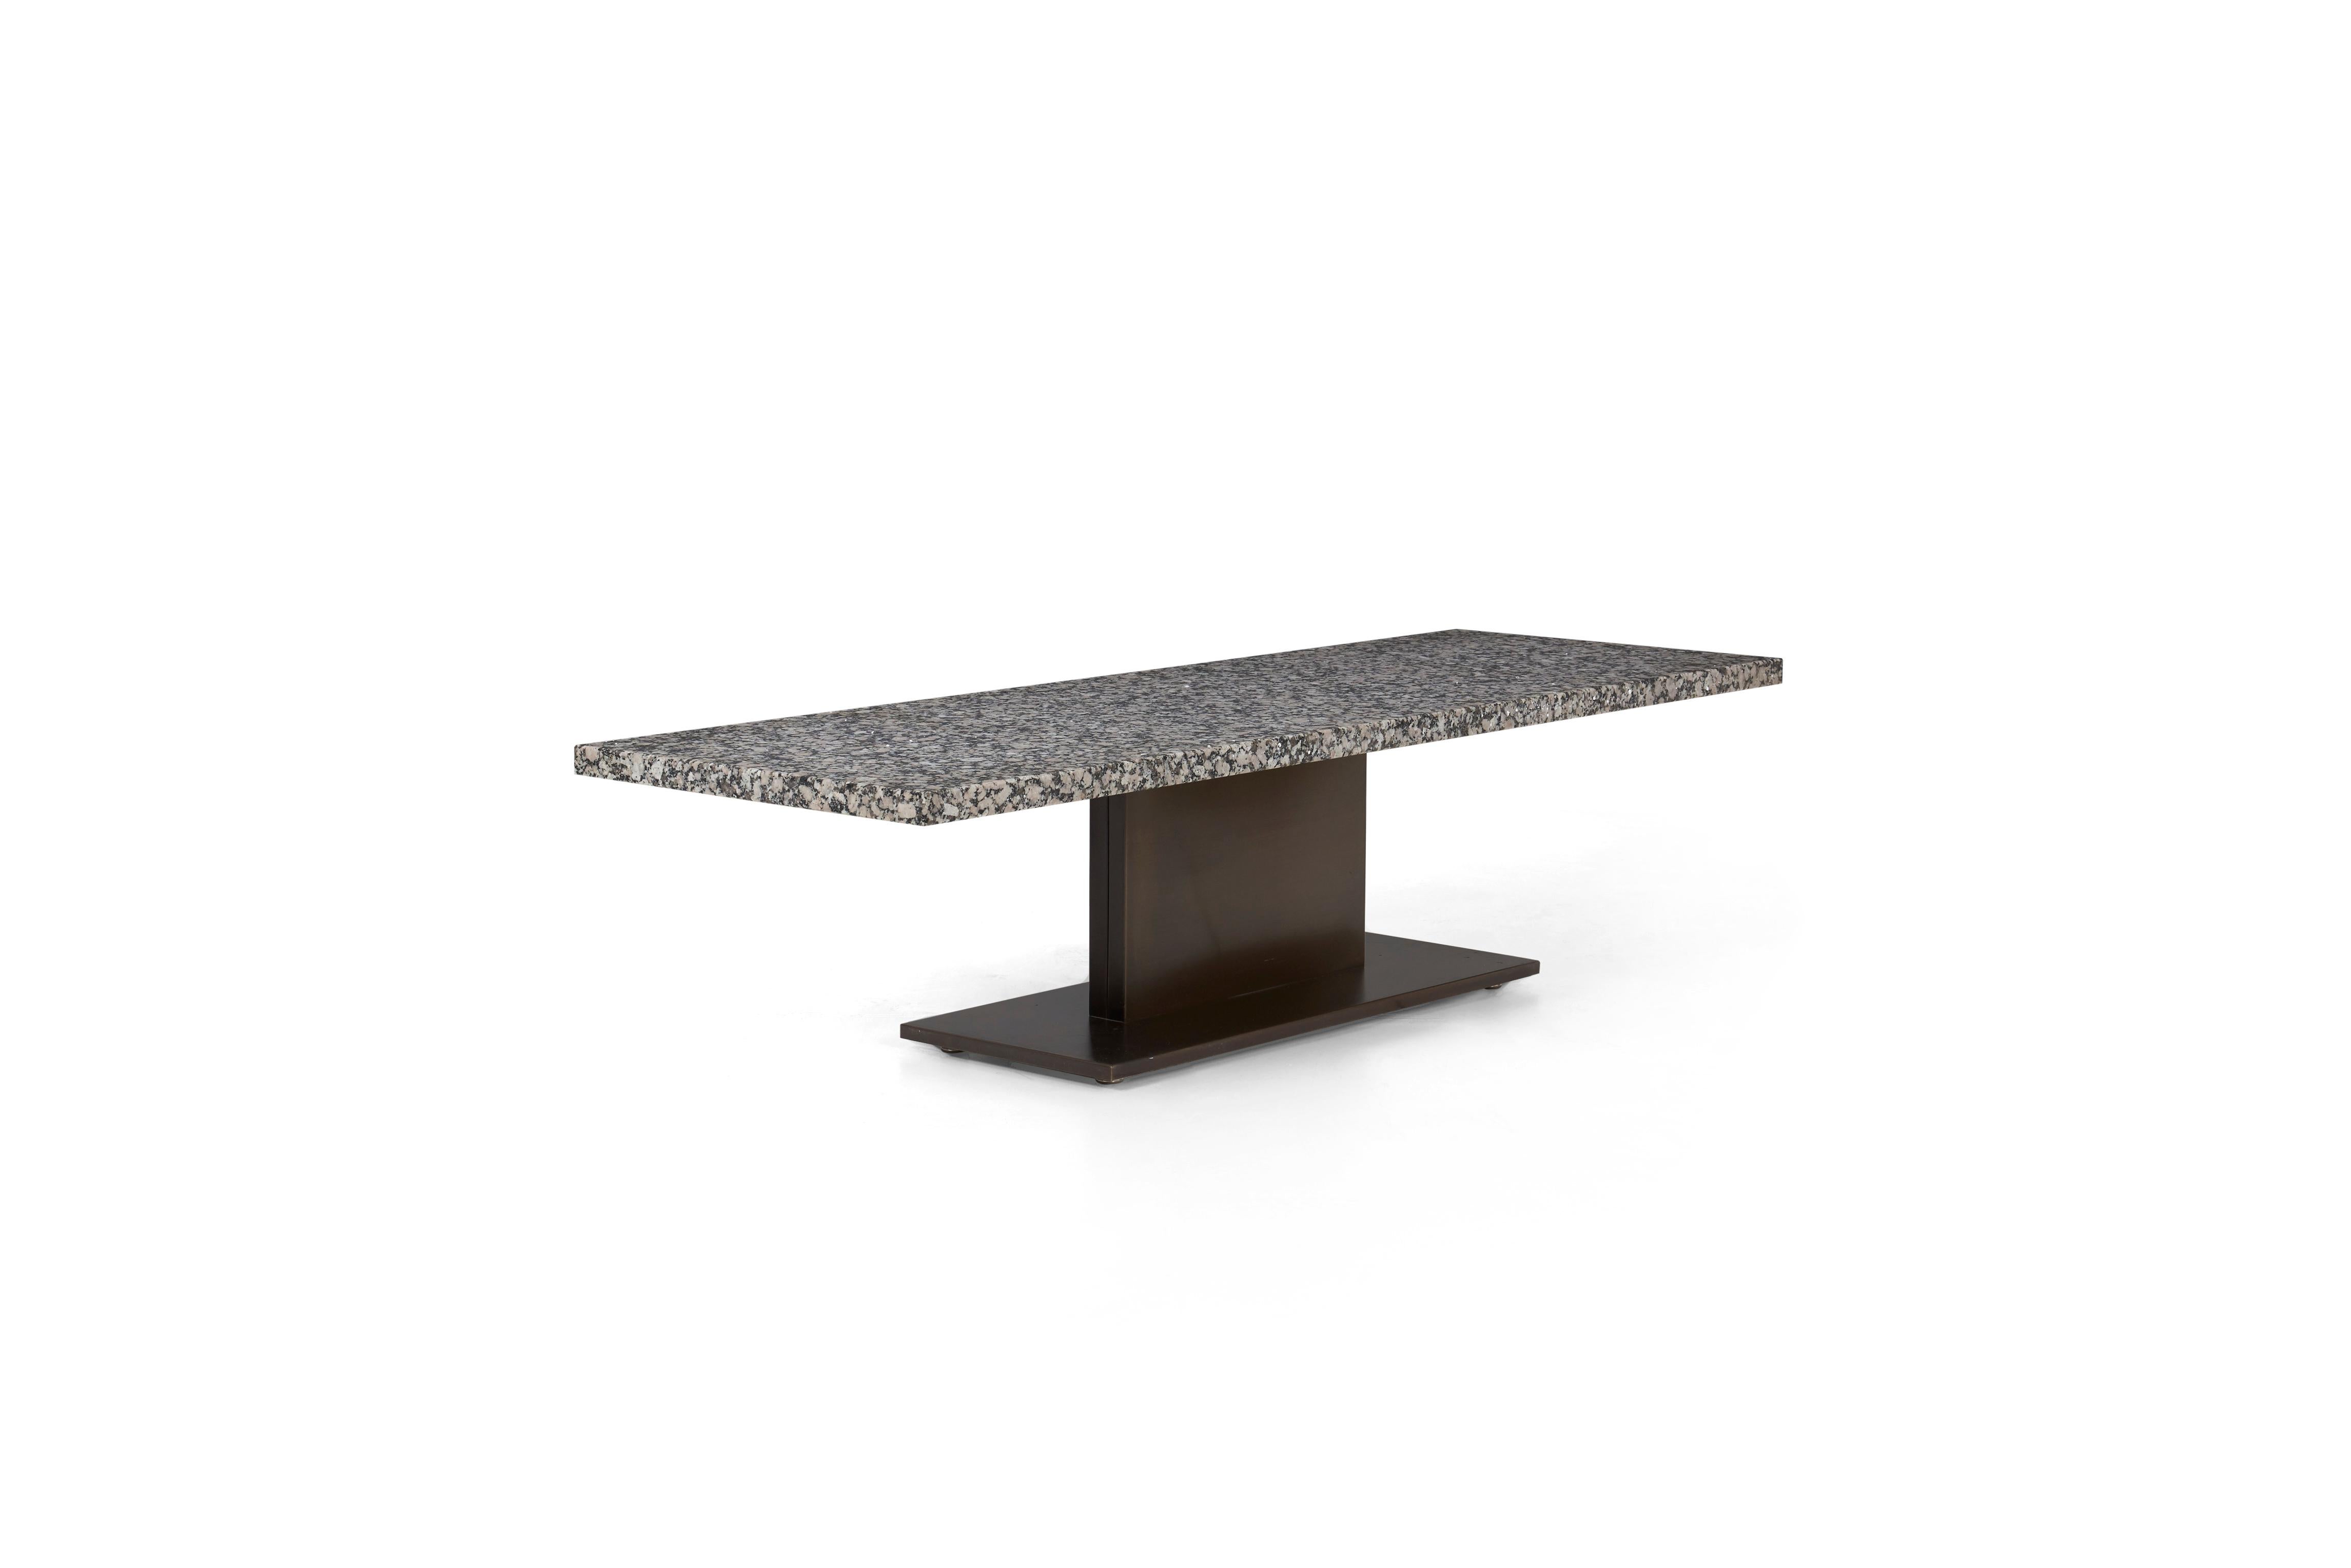 Custom Platner coffee table, architectural commission by Platner Office manufactured by Lehigh Leopold.
Honed Luna pearl granite top with bronze base.
  